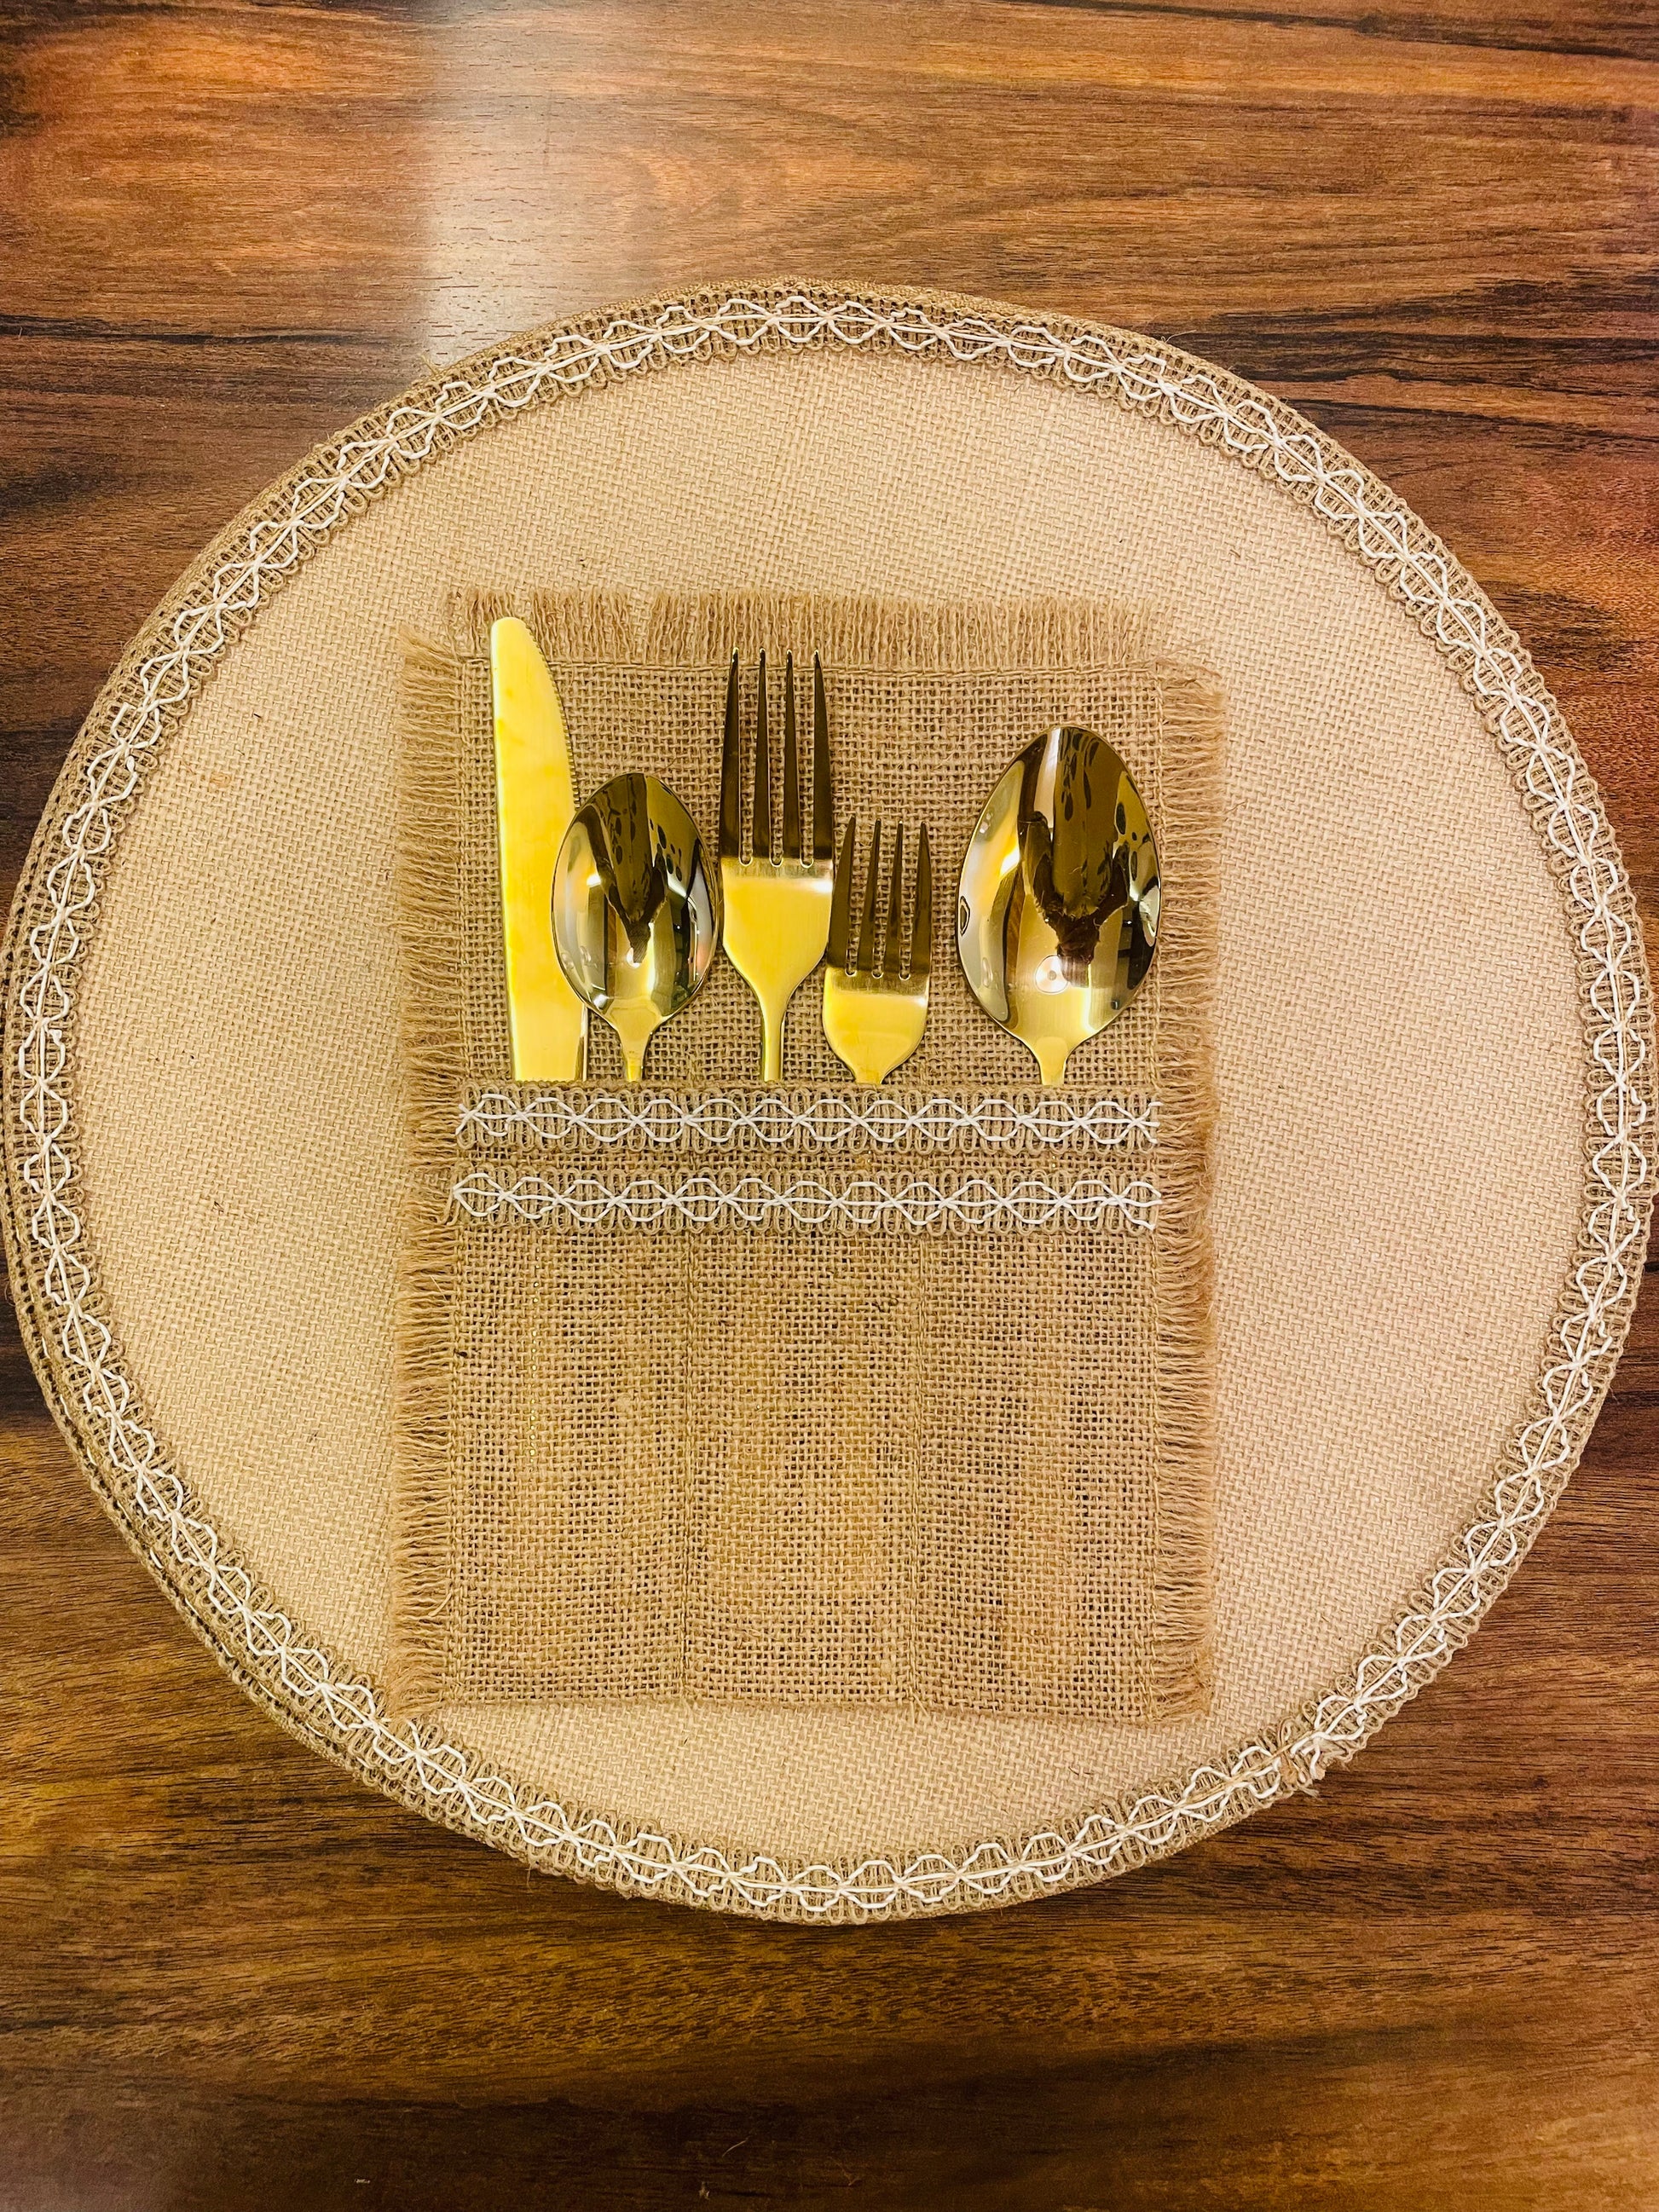 A set of cutlery holder made from natural jute and embellished with beautiful laces will surely add charm to your dining experience. It has three pockets perfectly sized to put small and big sized spoons , forks and knifes. Its neutral colour makes it perfect to go with both white and coloured crockery.